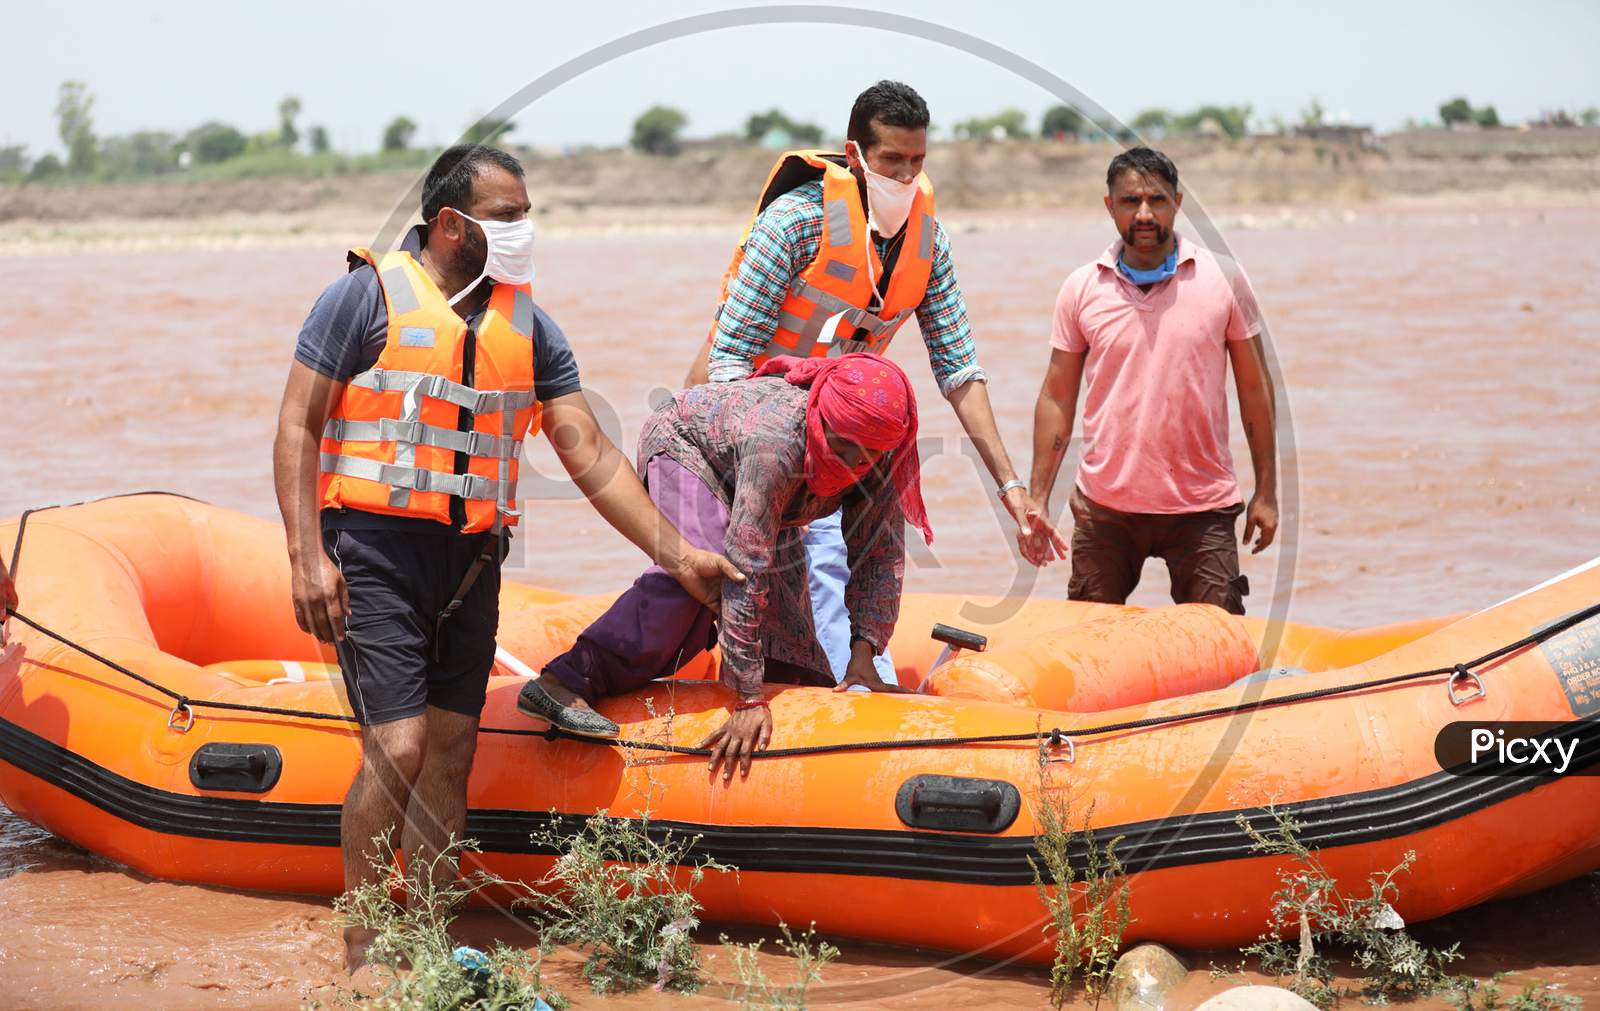 SDRF personnel rescue a woman who was caught in the Tawi River as water levels rose due to heavy rainfall on July 08, 2020 in Jammu